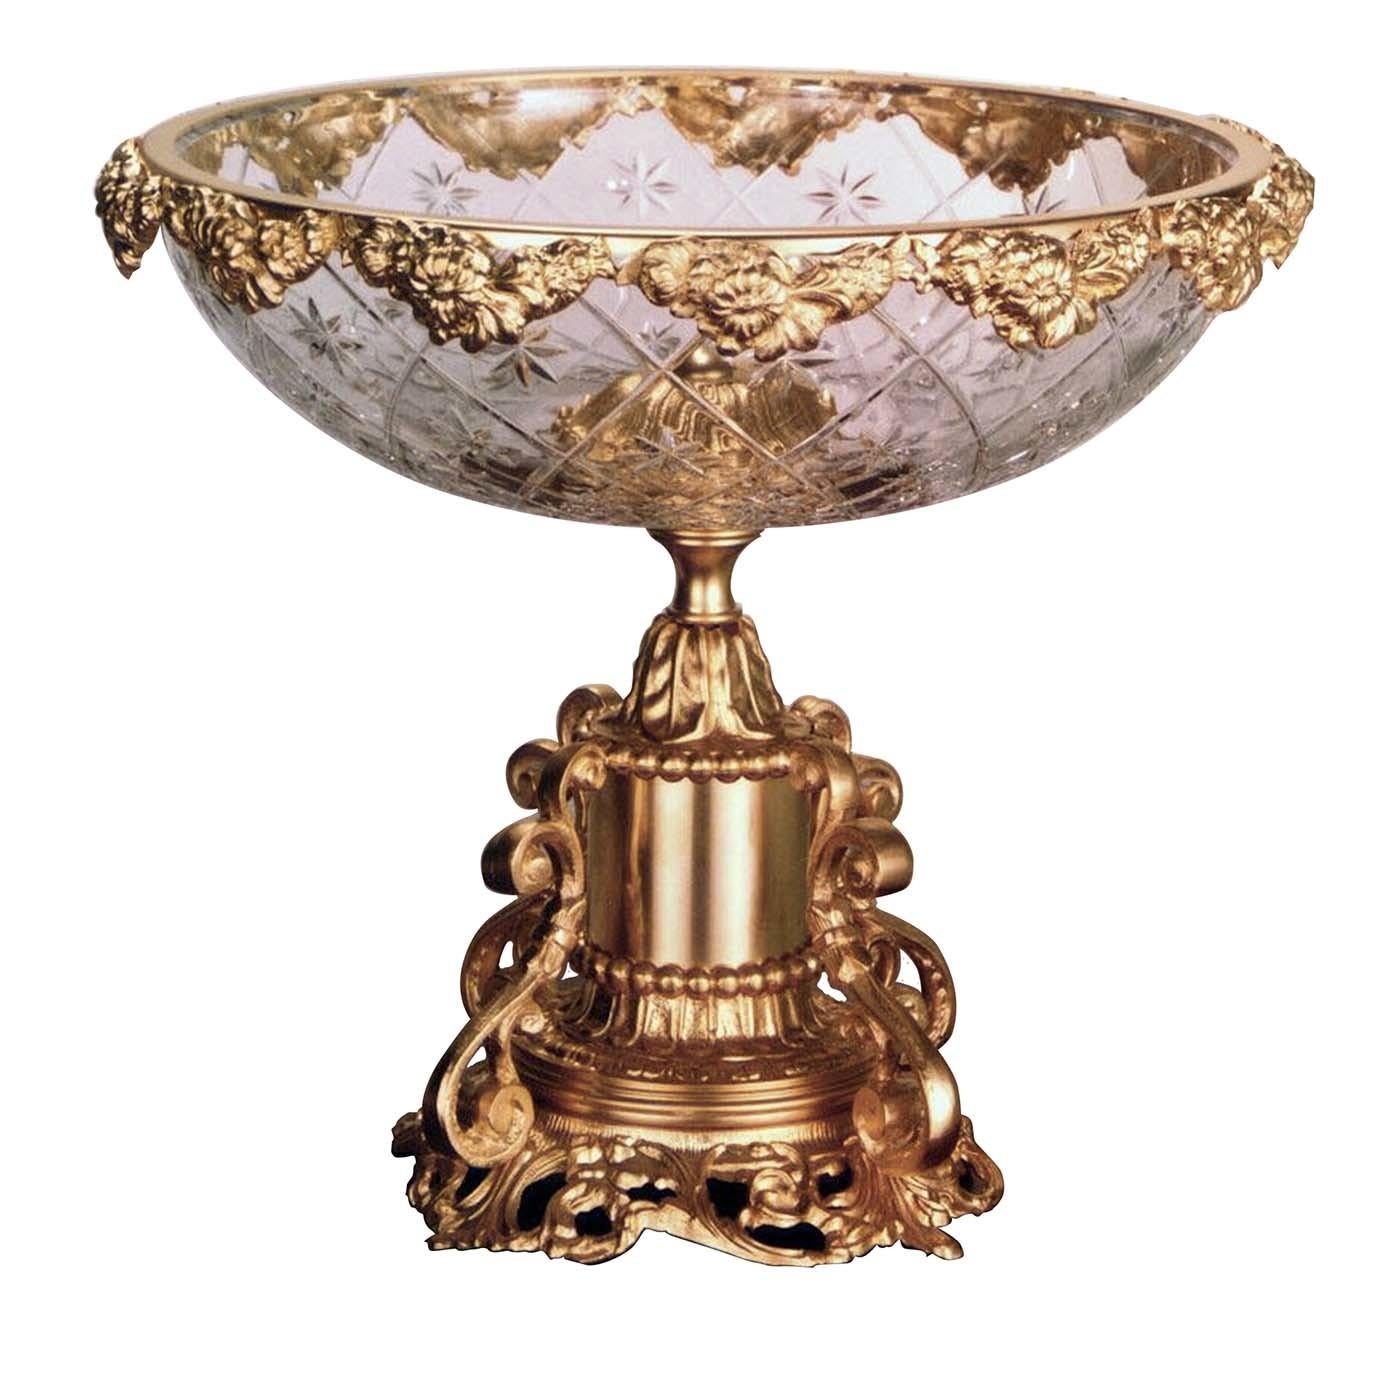 This superb centerpiece will create a lavish accent on a dining table, a mantelpiece, or a console, thanks to its exquisite craftsmanship and the use of high-quality materials. Particularly suitable for a classic decor, this versatile piece rests on